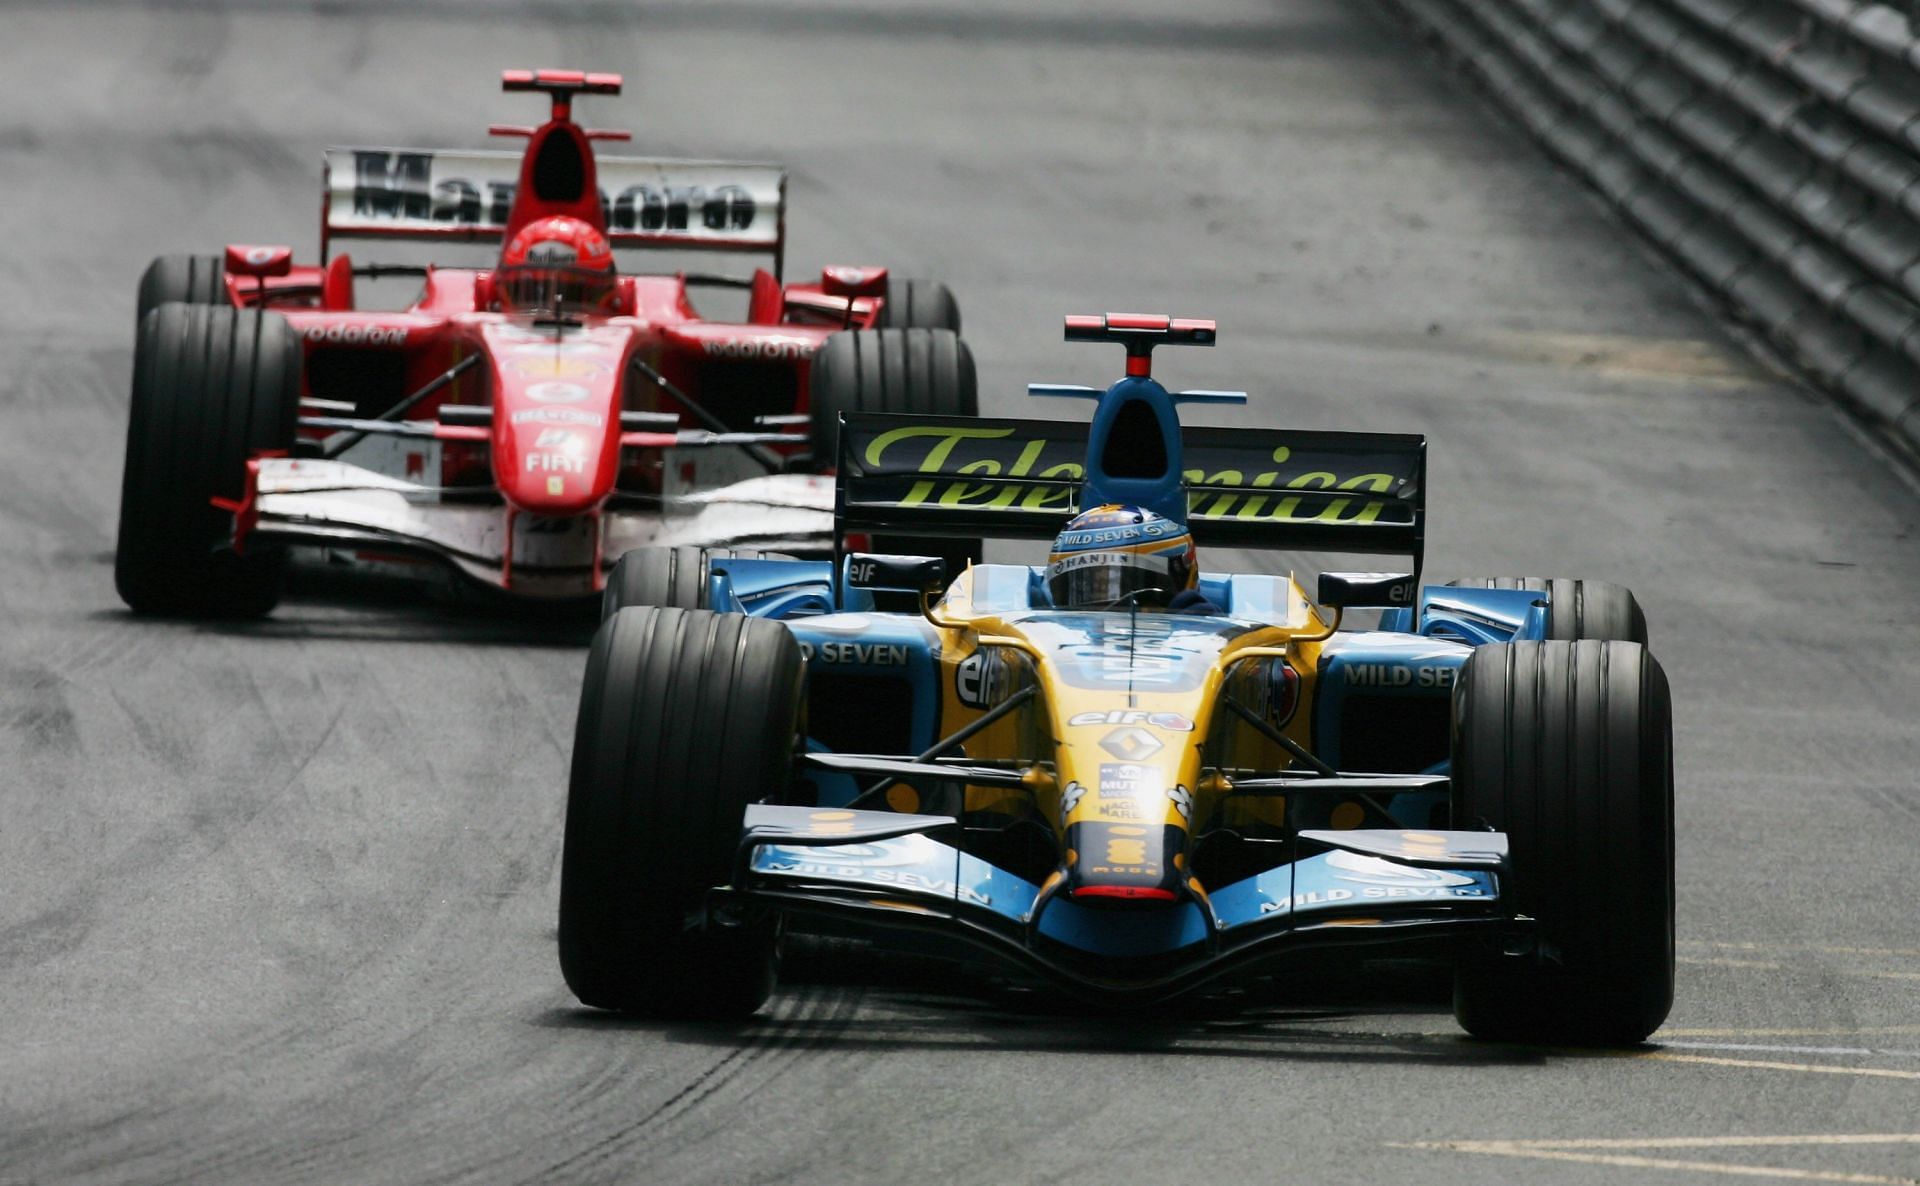 Michael Schumacher and Fernando Alonso went at it during the Monaco GP 2006